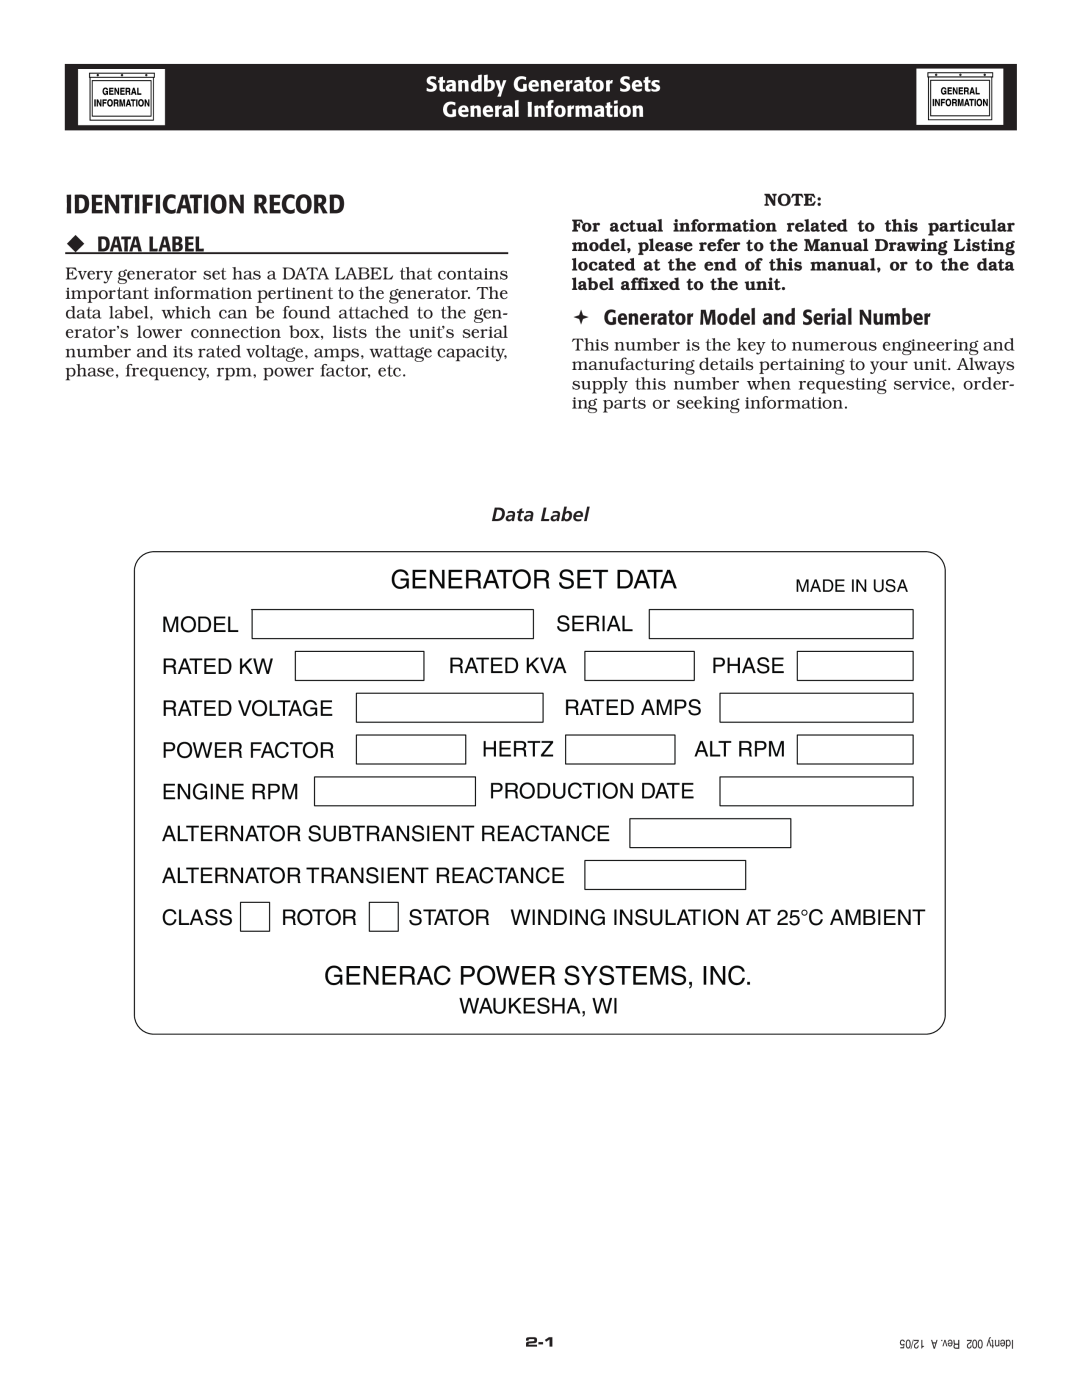 Generac Power Systems 005220-0 owner manual Identification Record, Standby Generator Sets General Information, ‹Data Label 